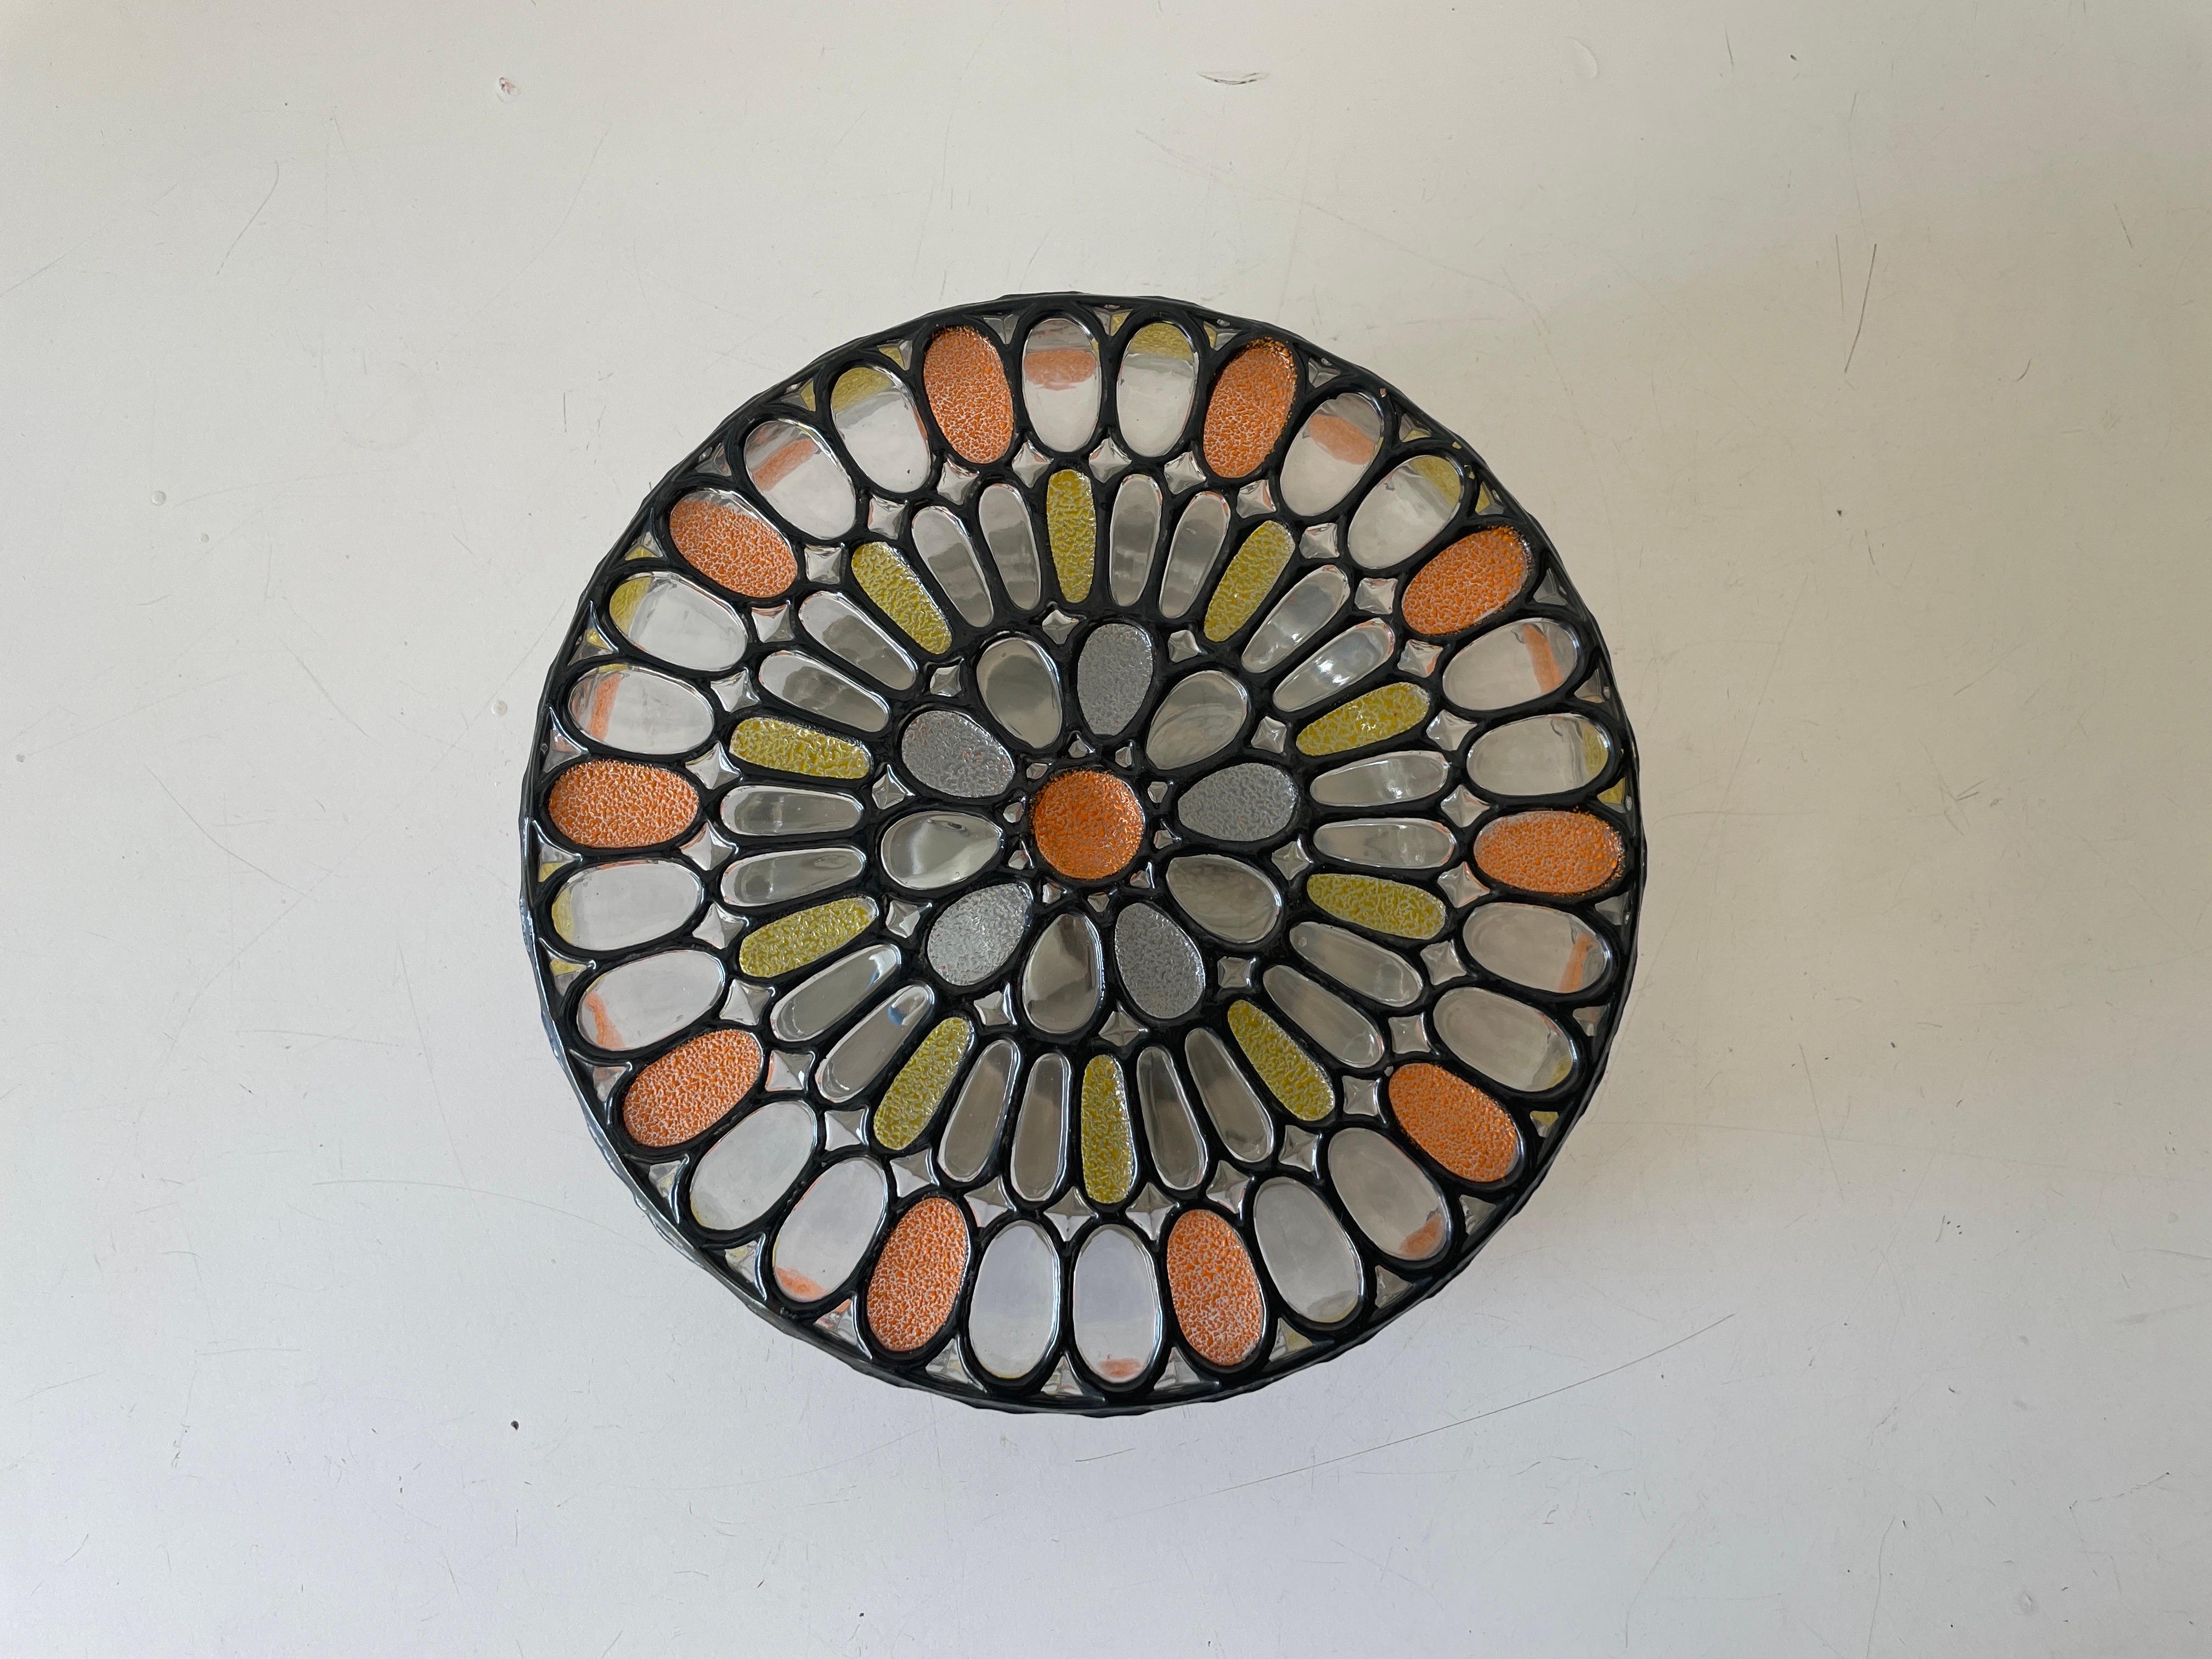 Wonderful colorful iron structured glass ceiling lamp by Limburg, 1960s Germany

Very elegant, round and rare design wall light or flush mount

It is very ideal and suitable for all living areas.

Lamp is in good condition. No damage, no crack.
Wear